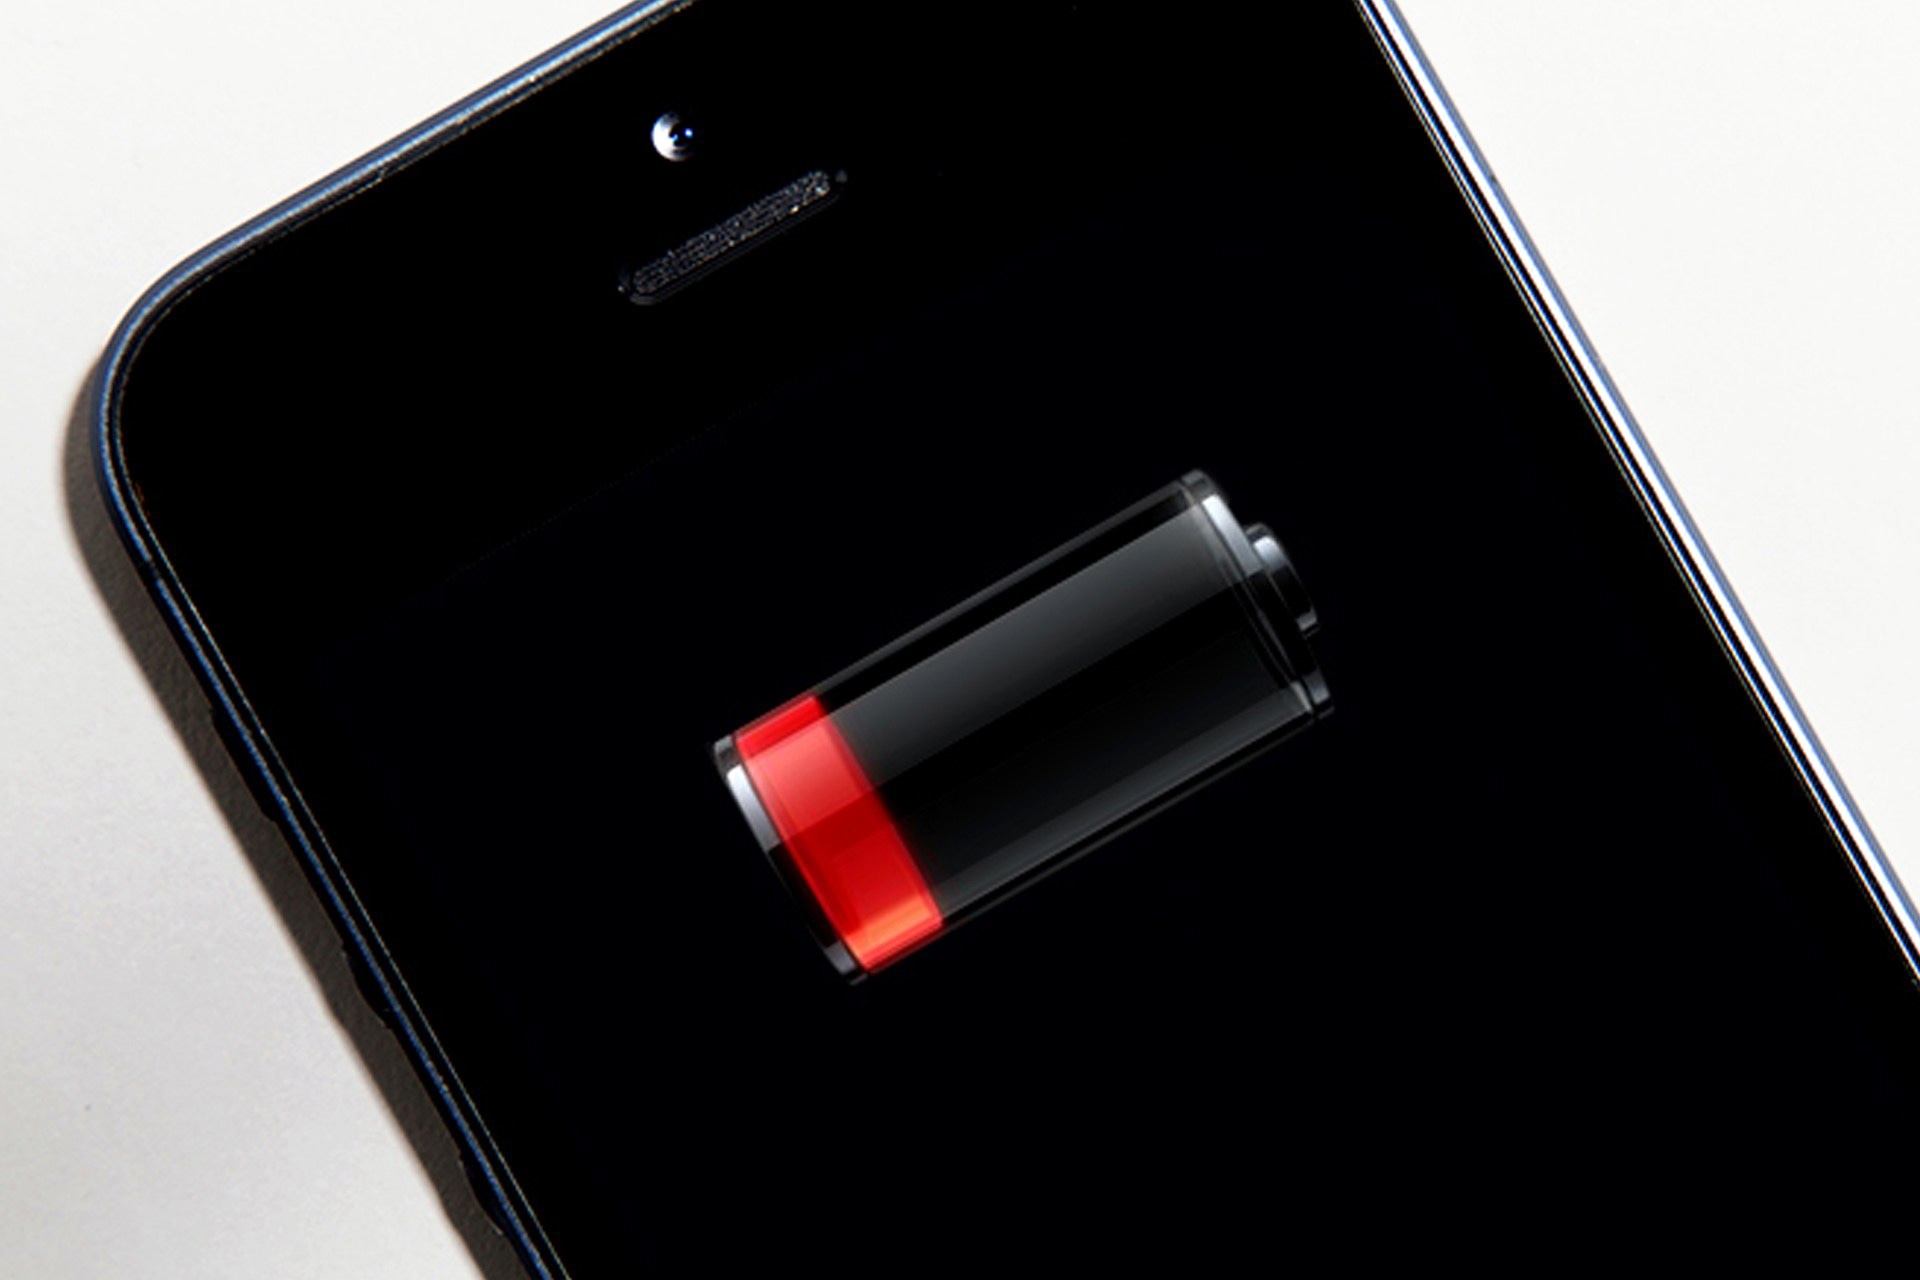 Apple promises to be more honest with updates that could damage the battery of iPhones